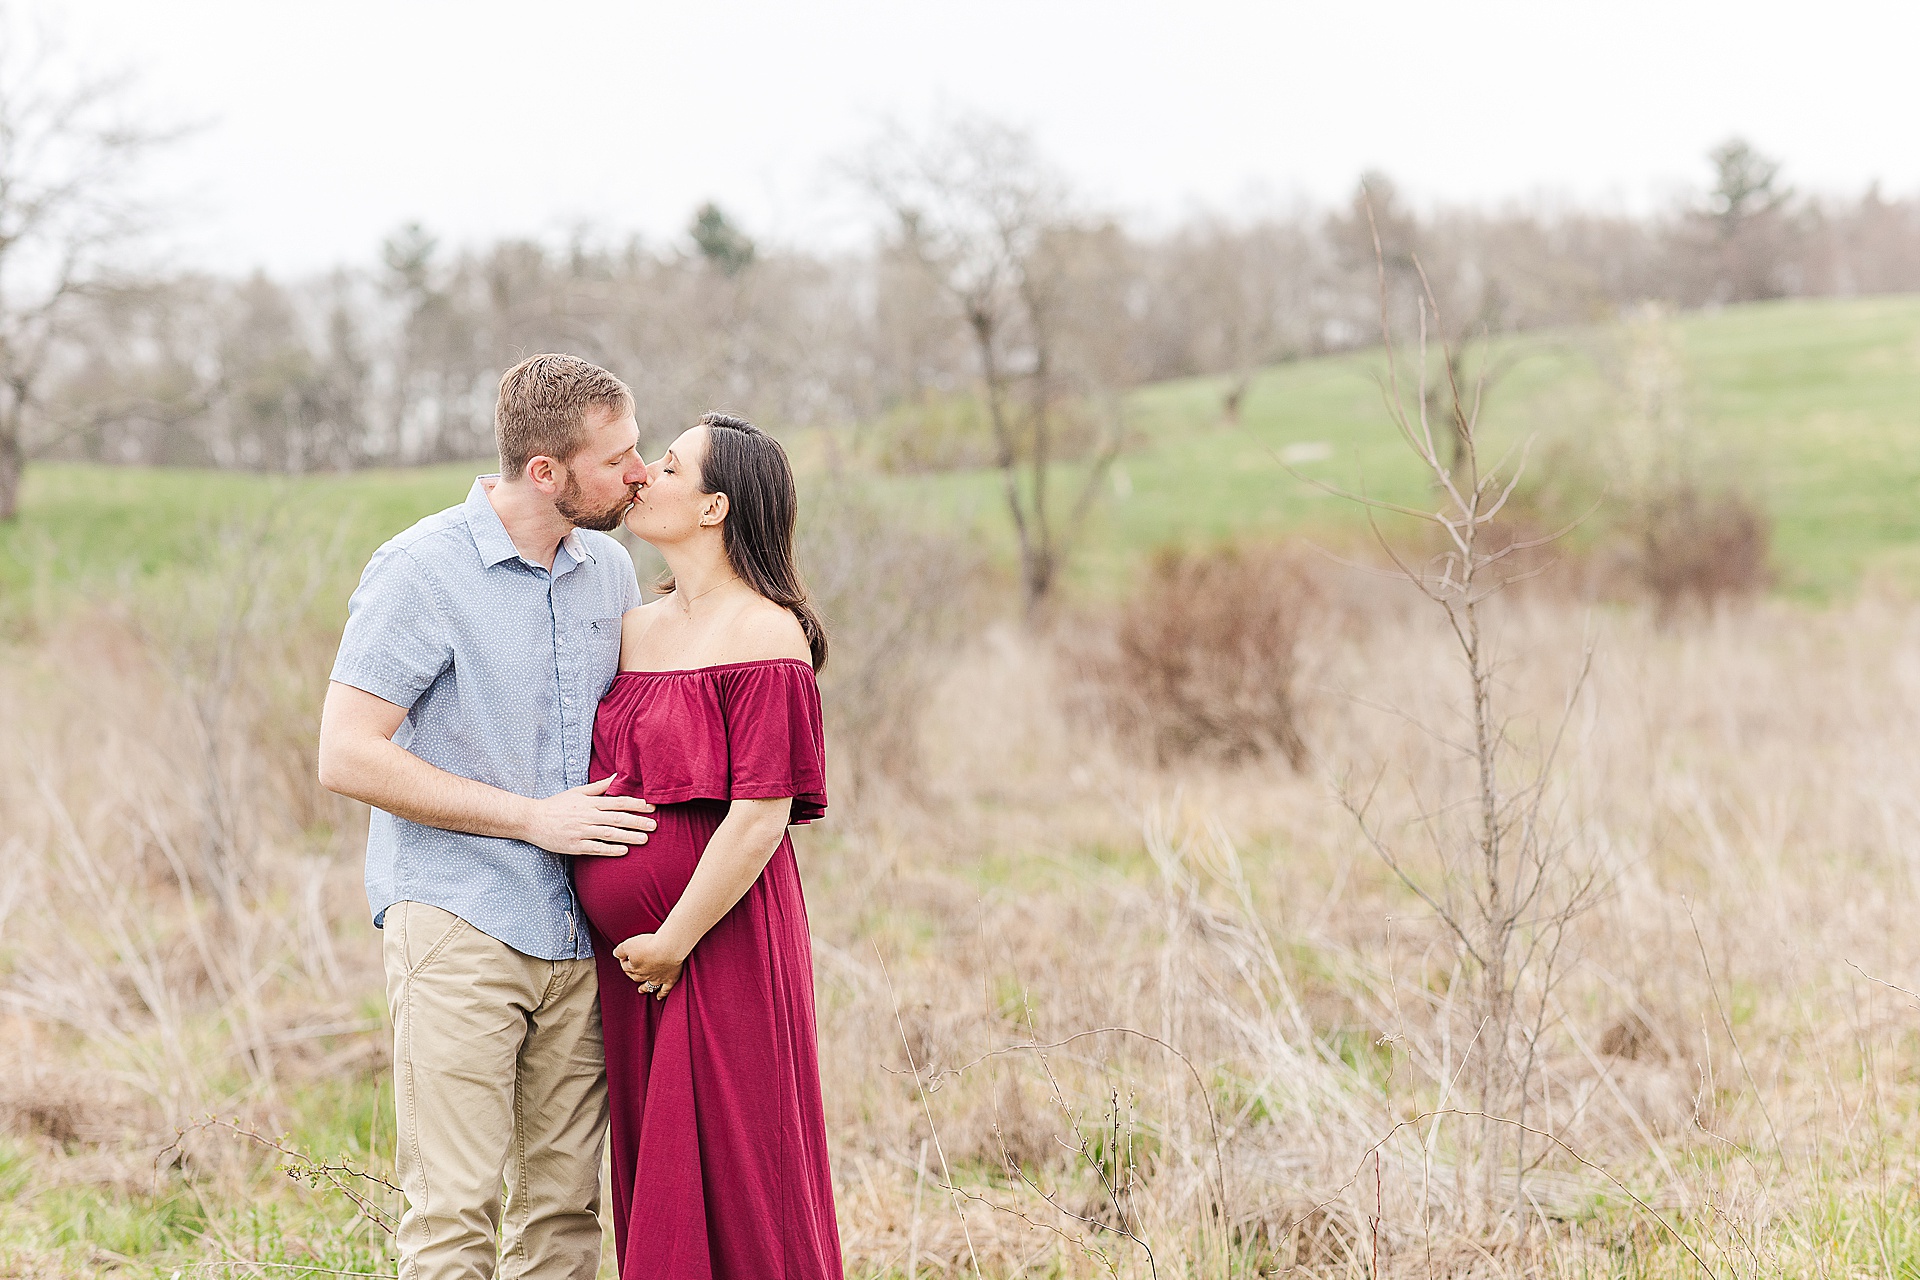 Seasonal Guide for Maternity Photos. Man and woman kiss during maternity photo session with Sara Sniderman Photography at Break Neck Hill southborough Massachusetts